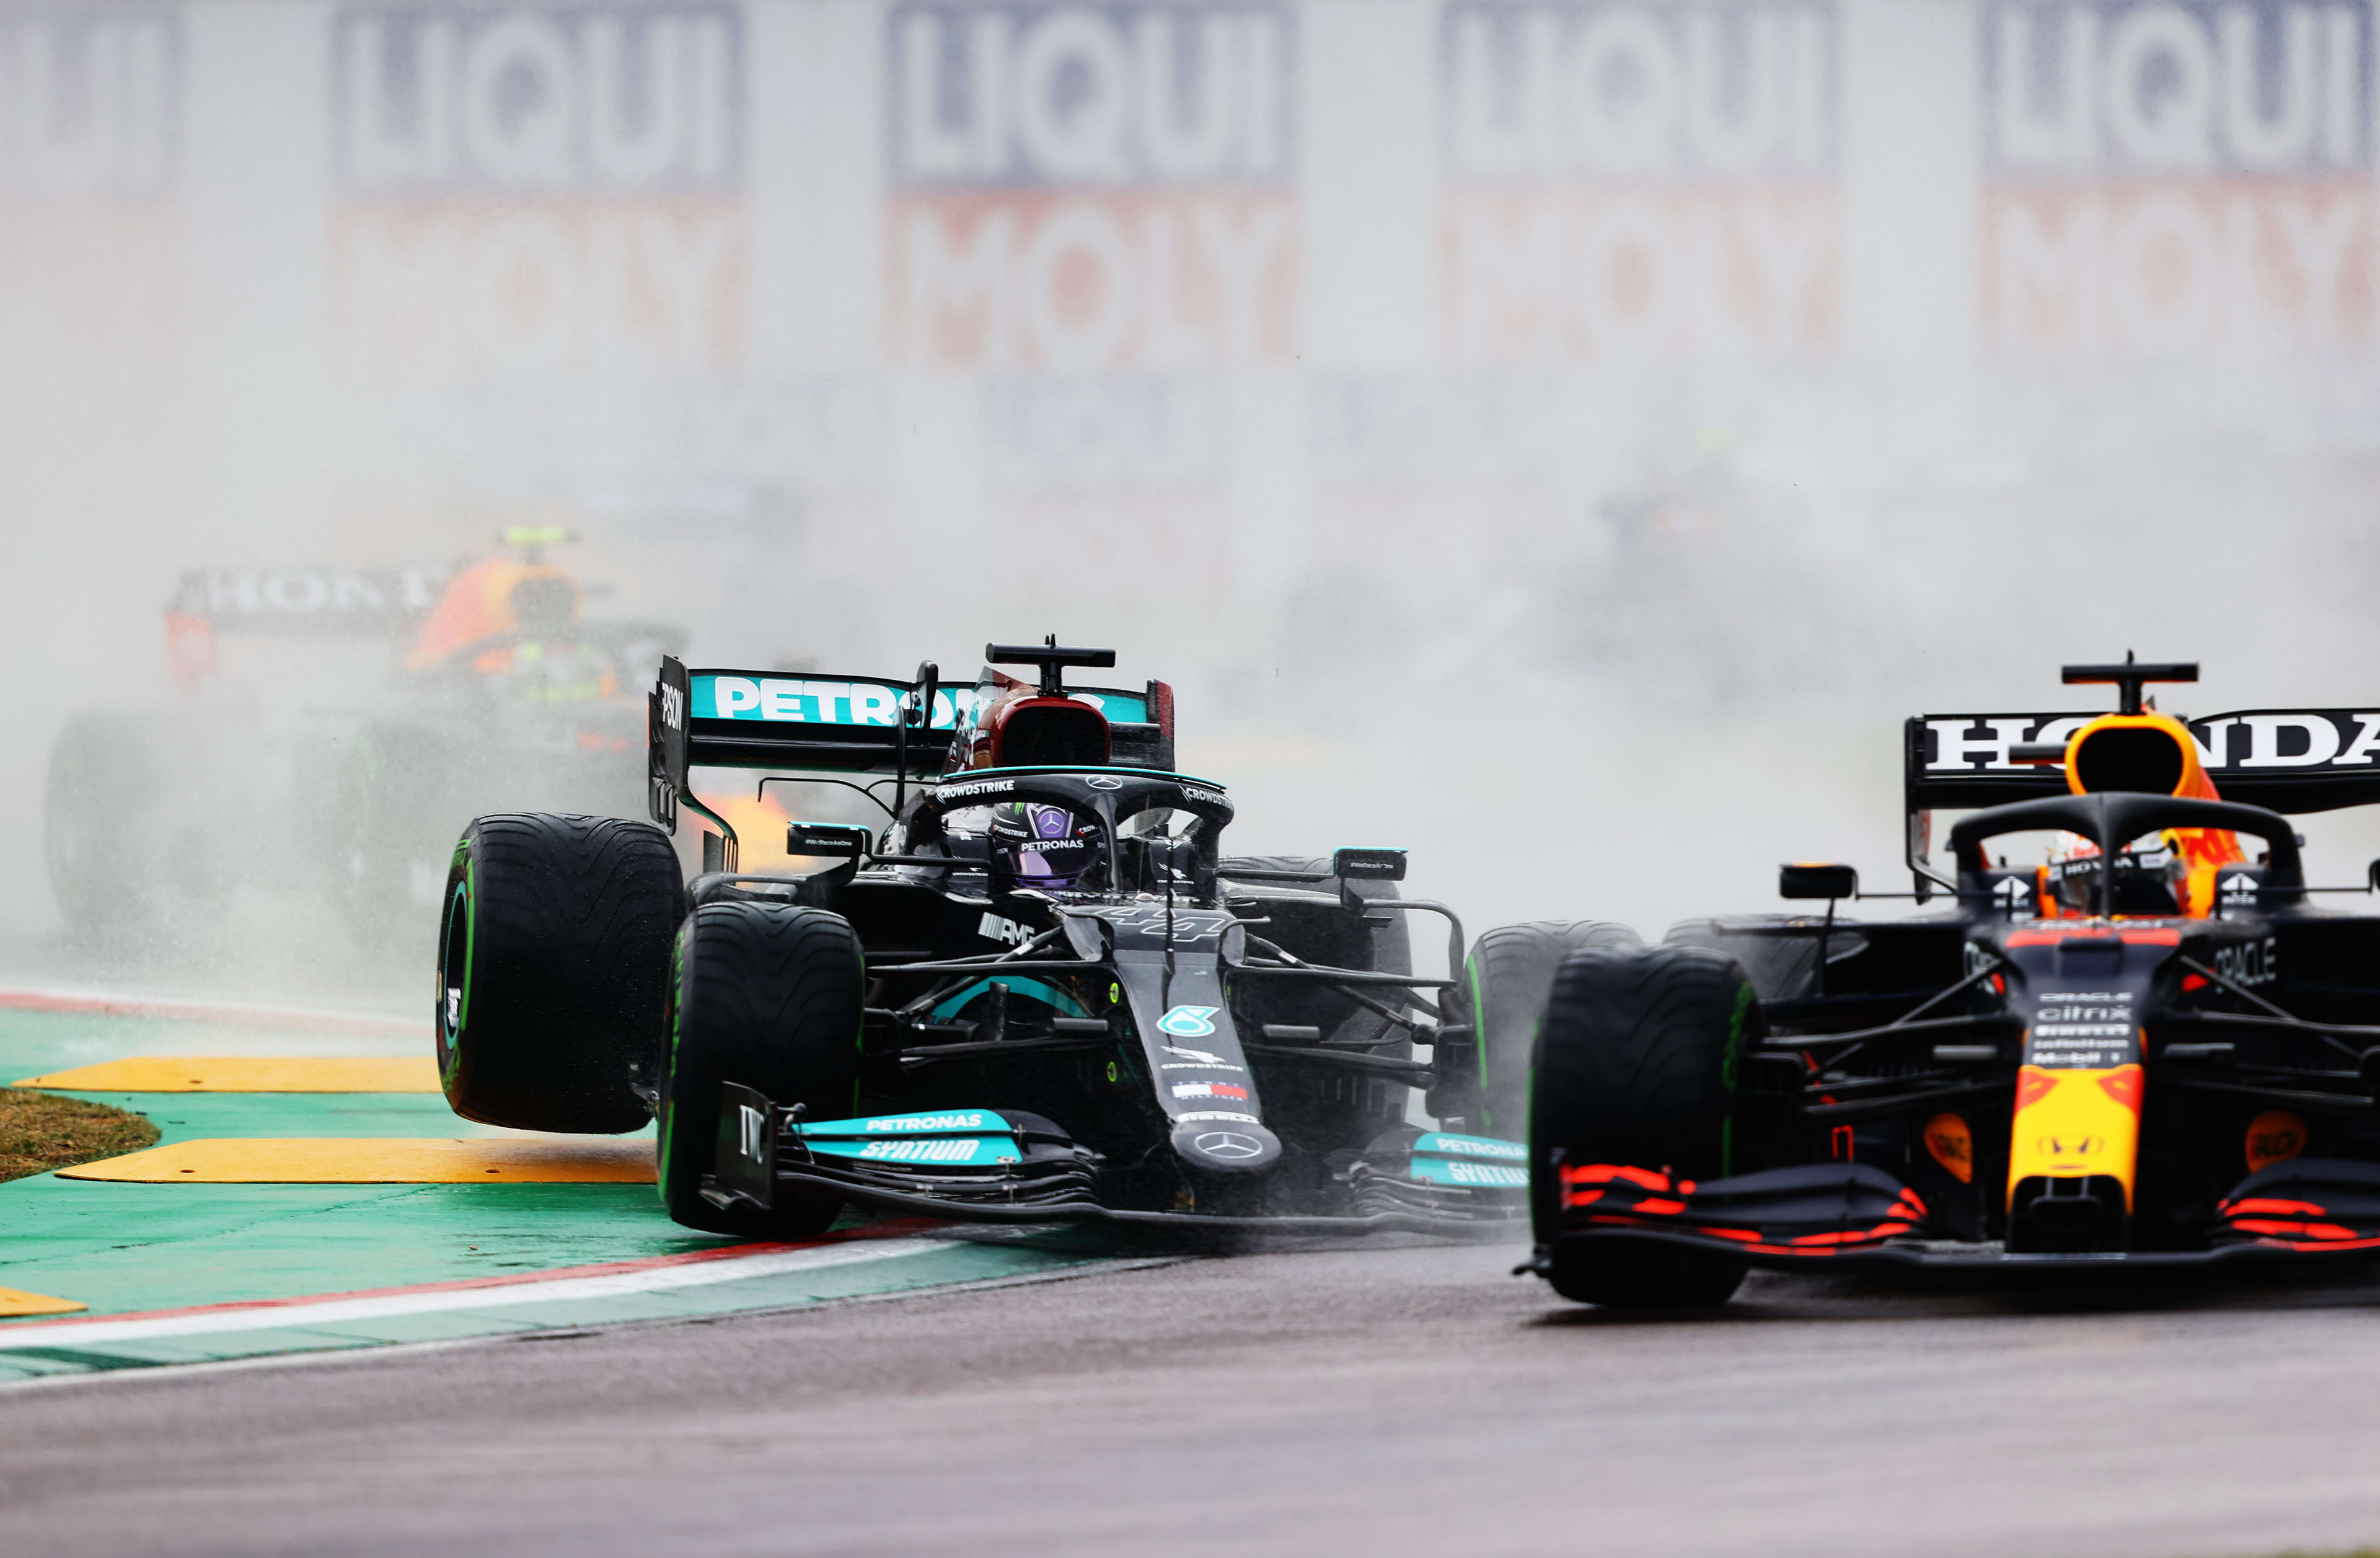 Verstappen and Hamilton at odds over whether they made contact in crucial start of Imola race | Formula 1®